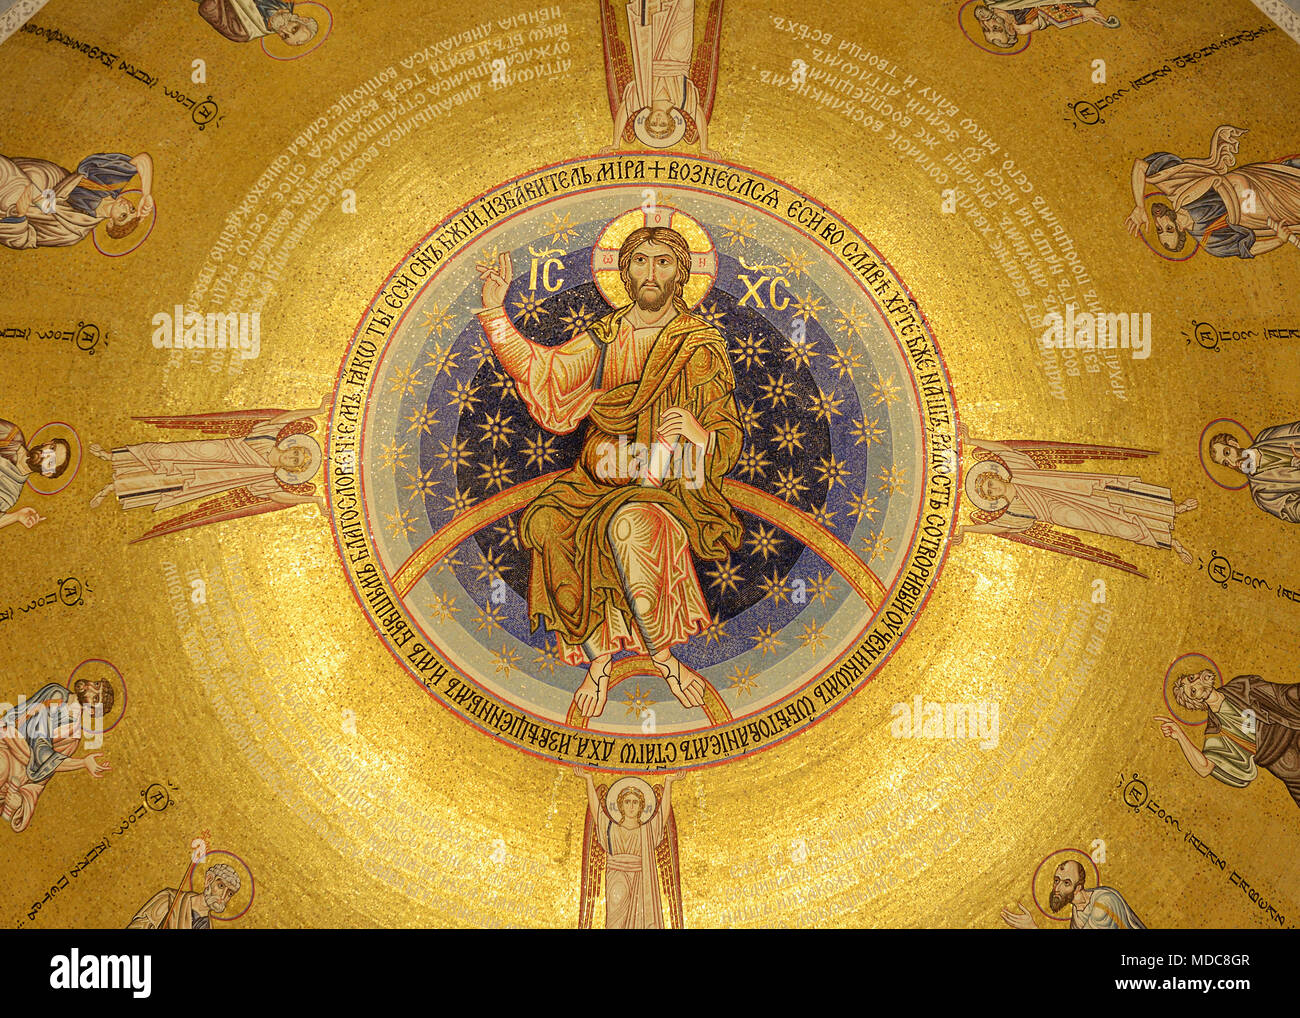 Dome ceiling inside Saint Sava Church in Belgrade, depicting the Ascension of Jesus Christ. Stock Photo